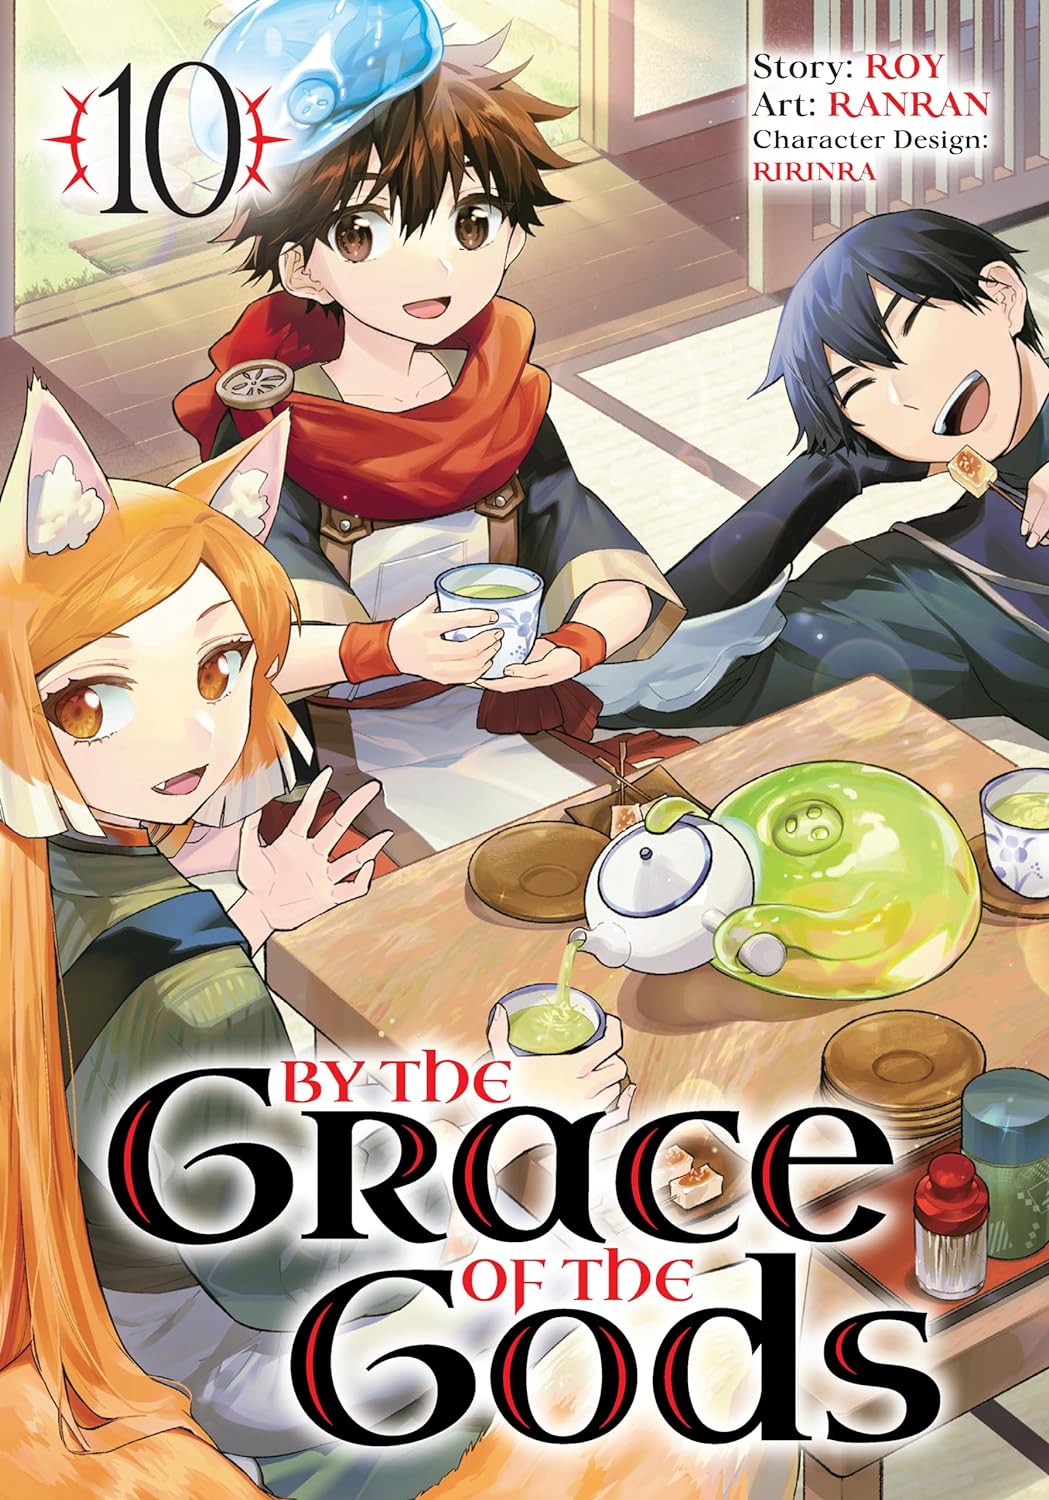 By the Grace of the Gods (Manga) Vol. 10